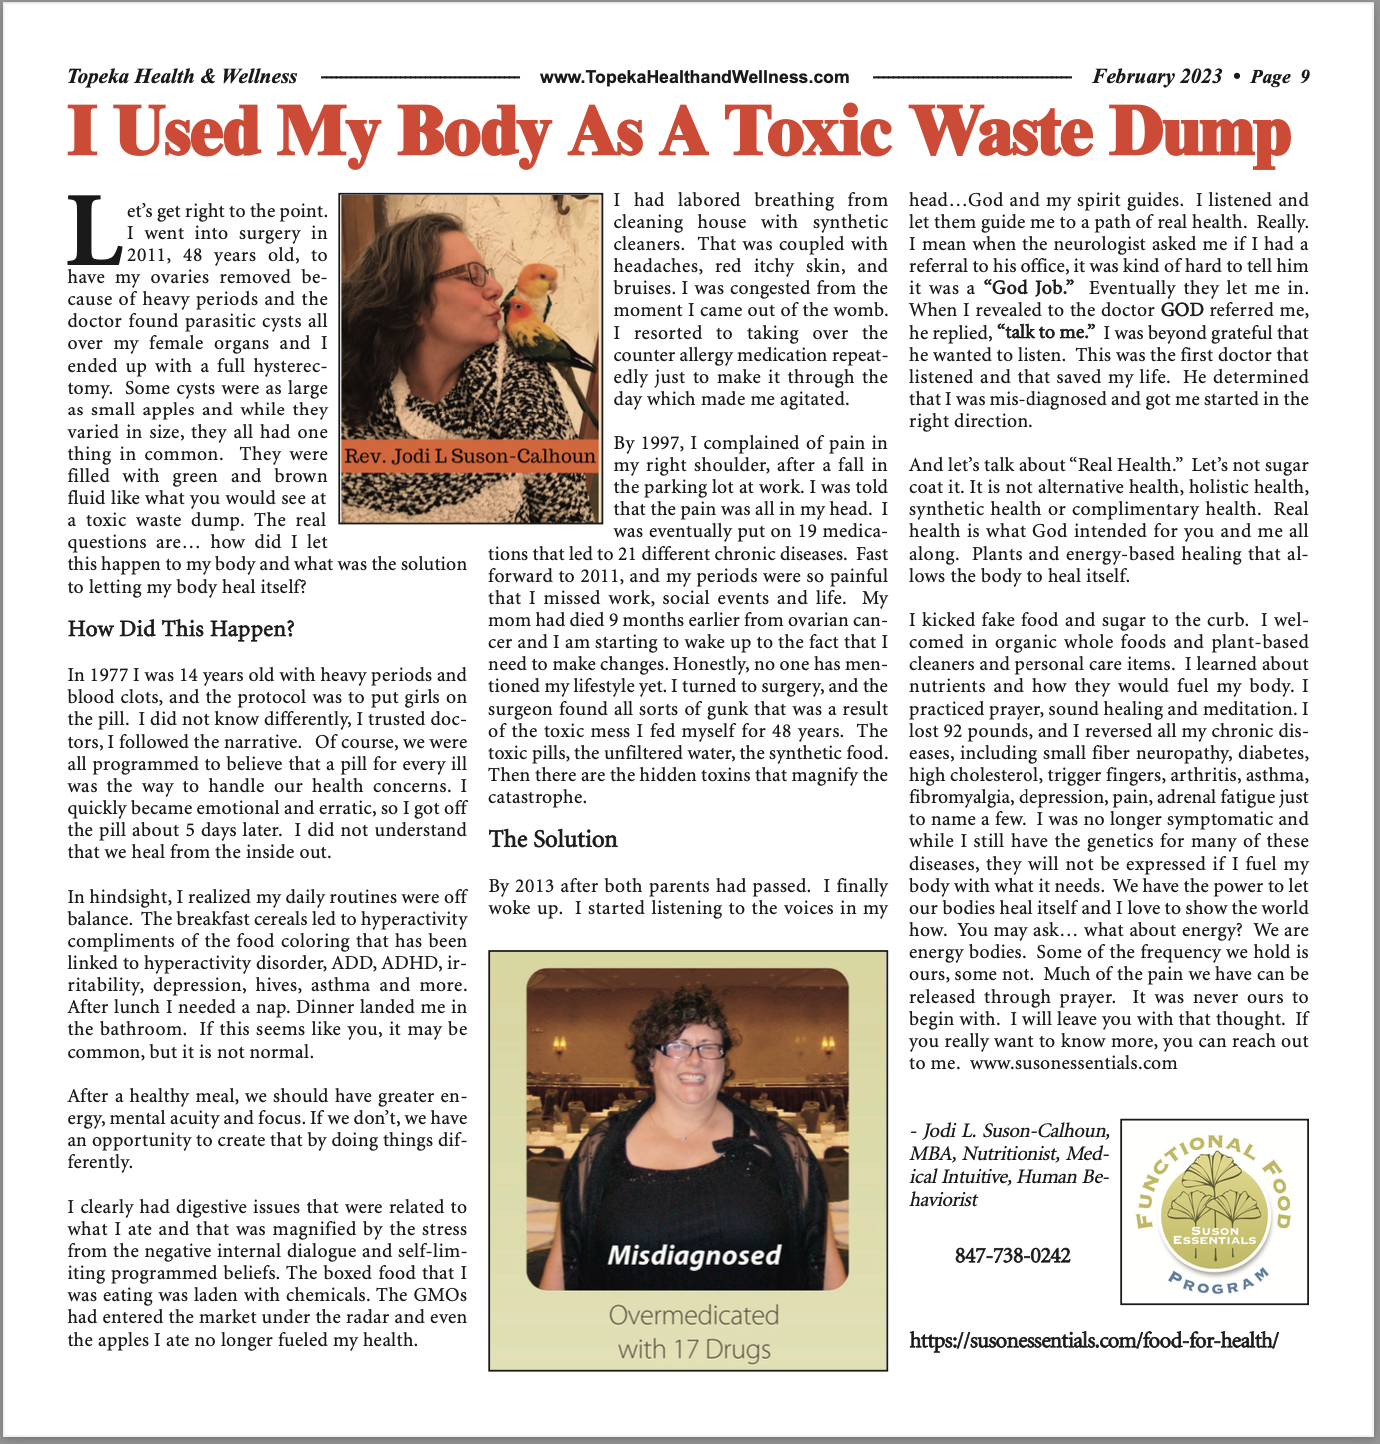 I used my Body as a toxic Waste Dump